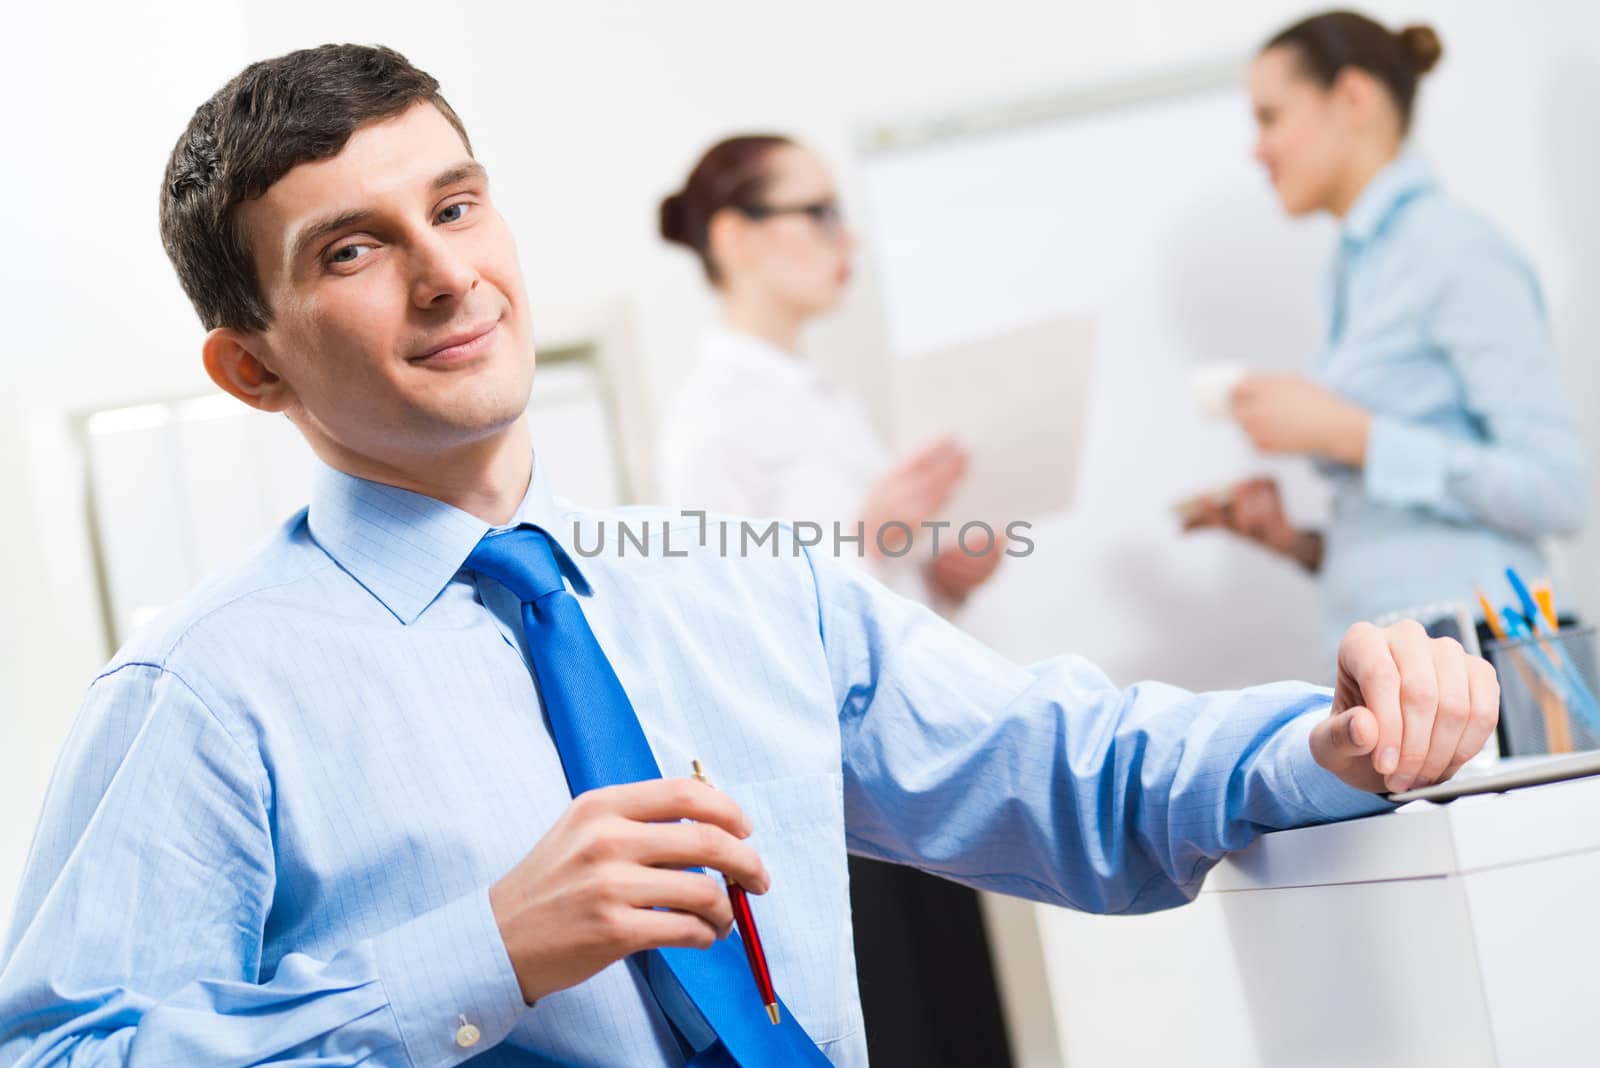 Portrait of a businessman in a blue shirt in the background of colleagues discussing